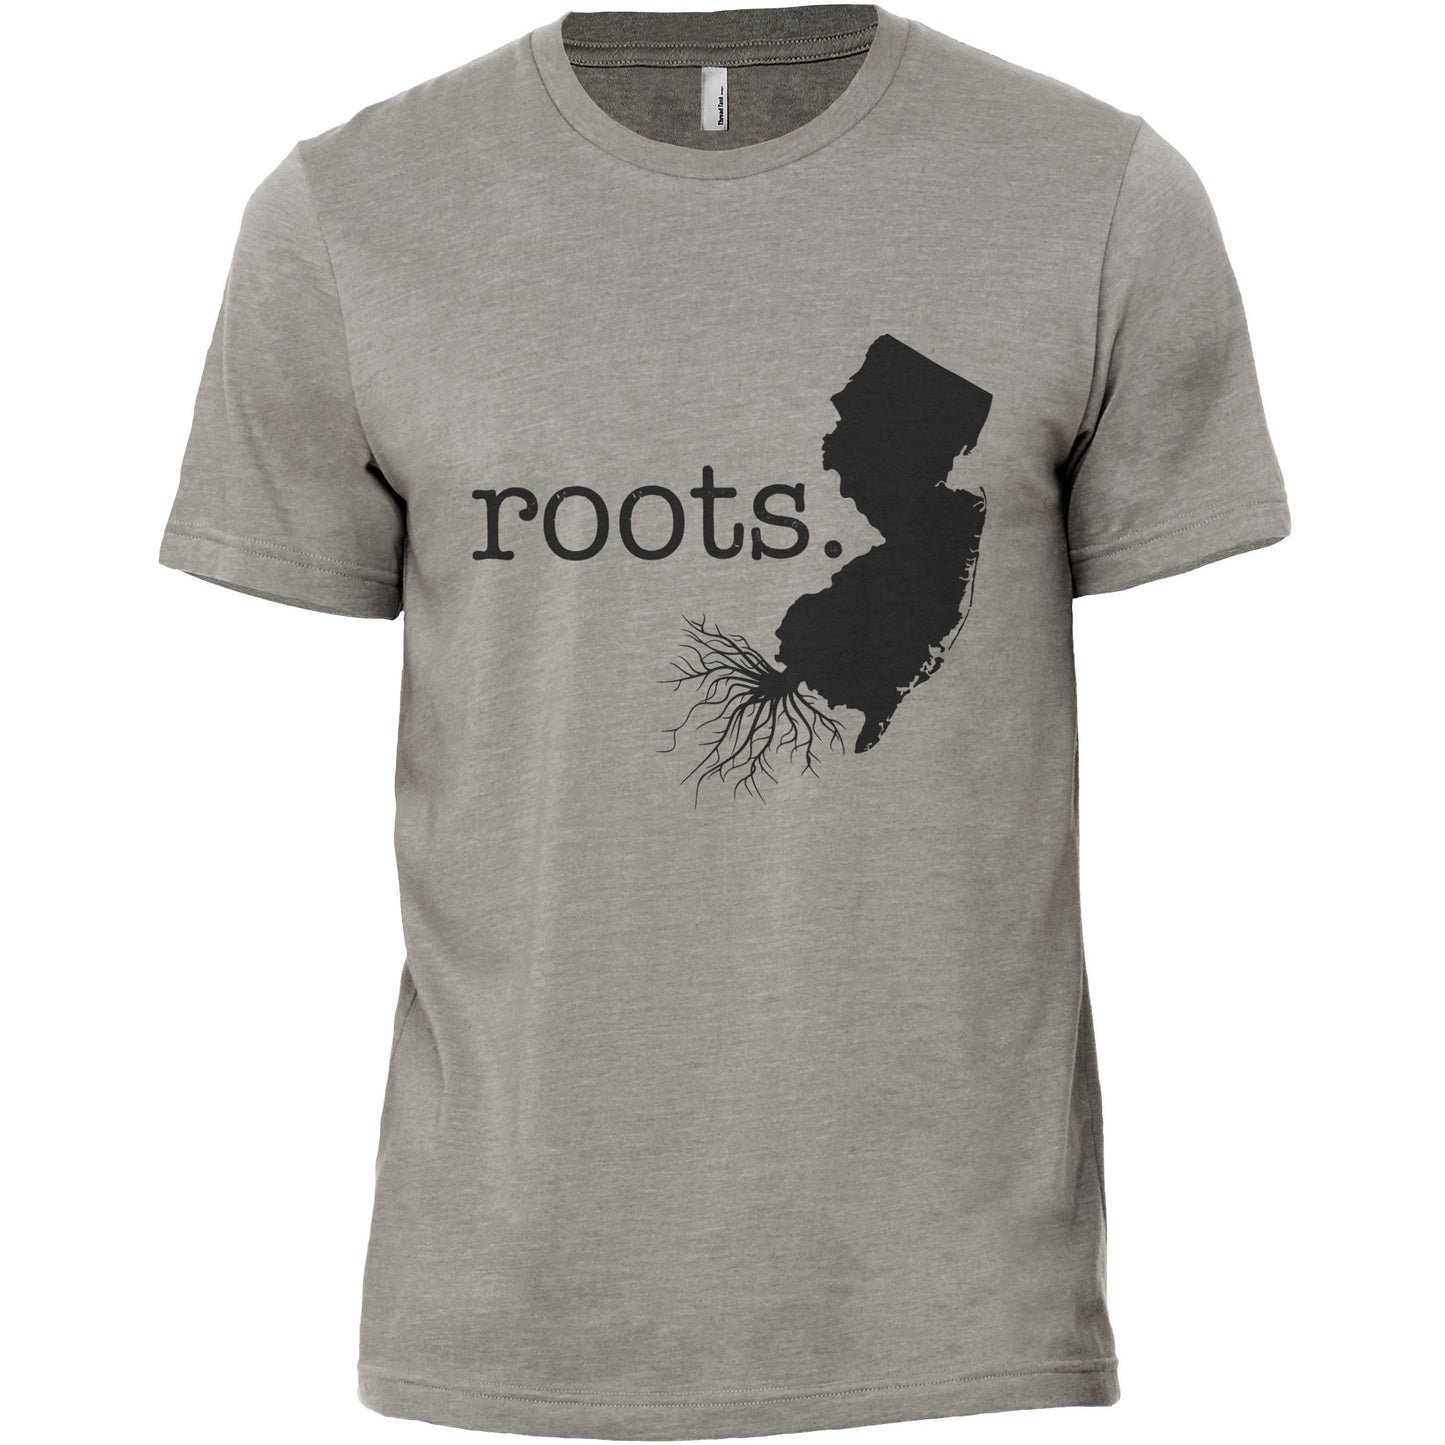 Roots New Jersey NJ